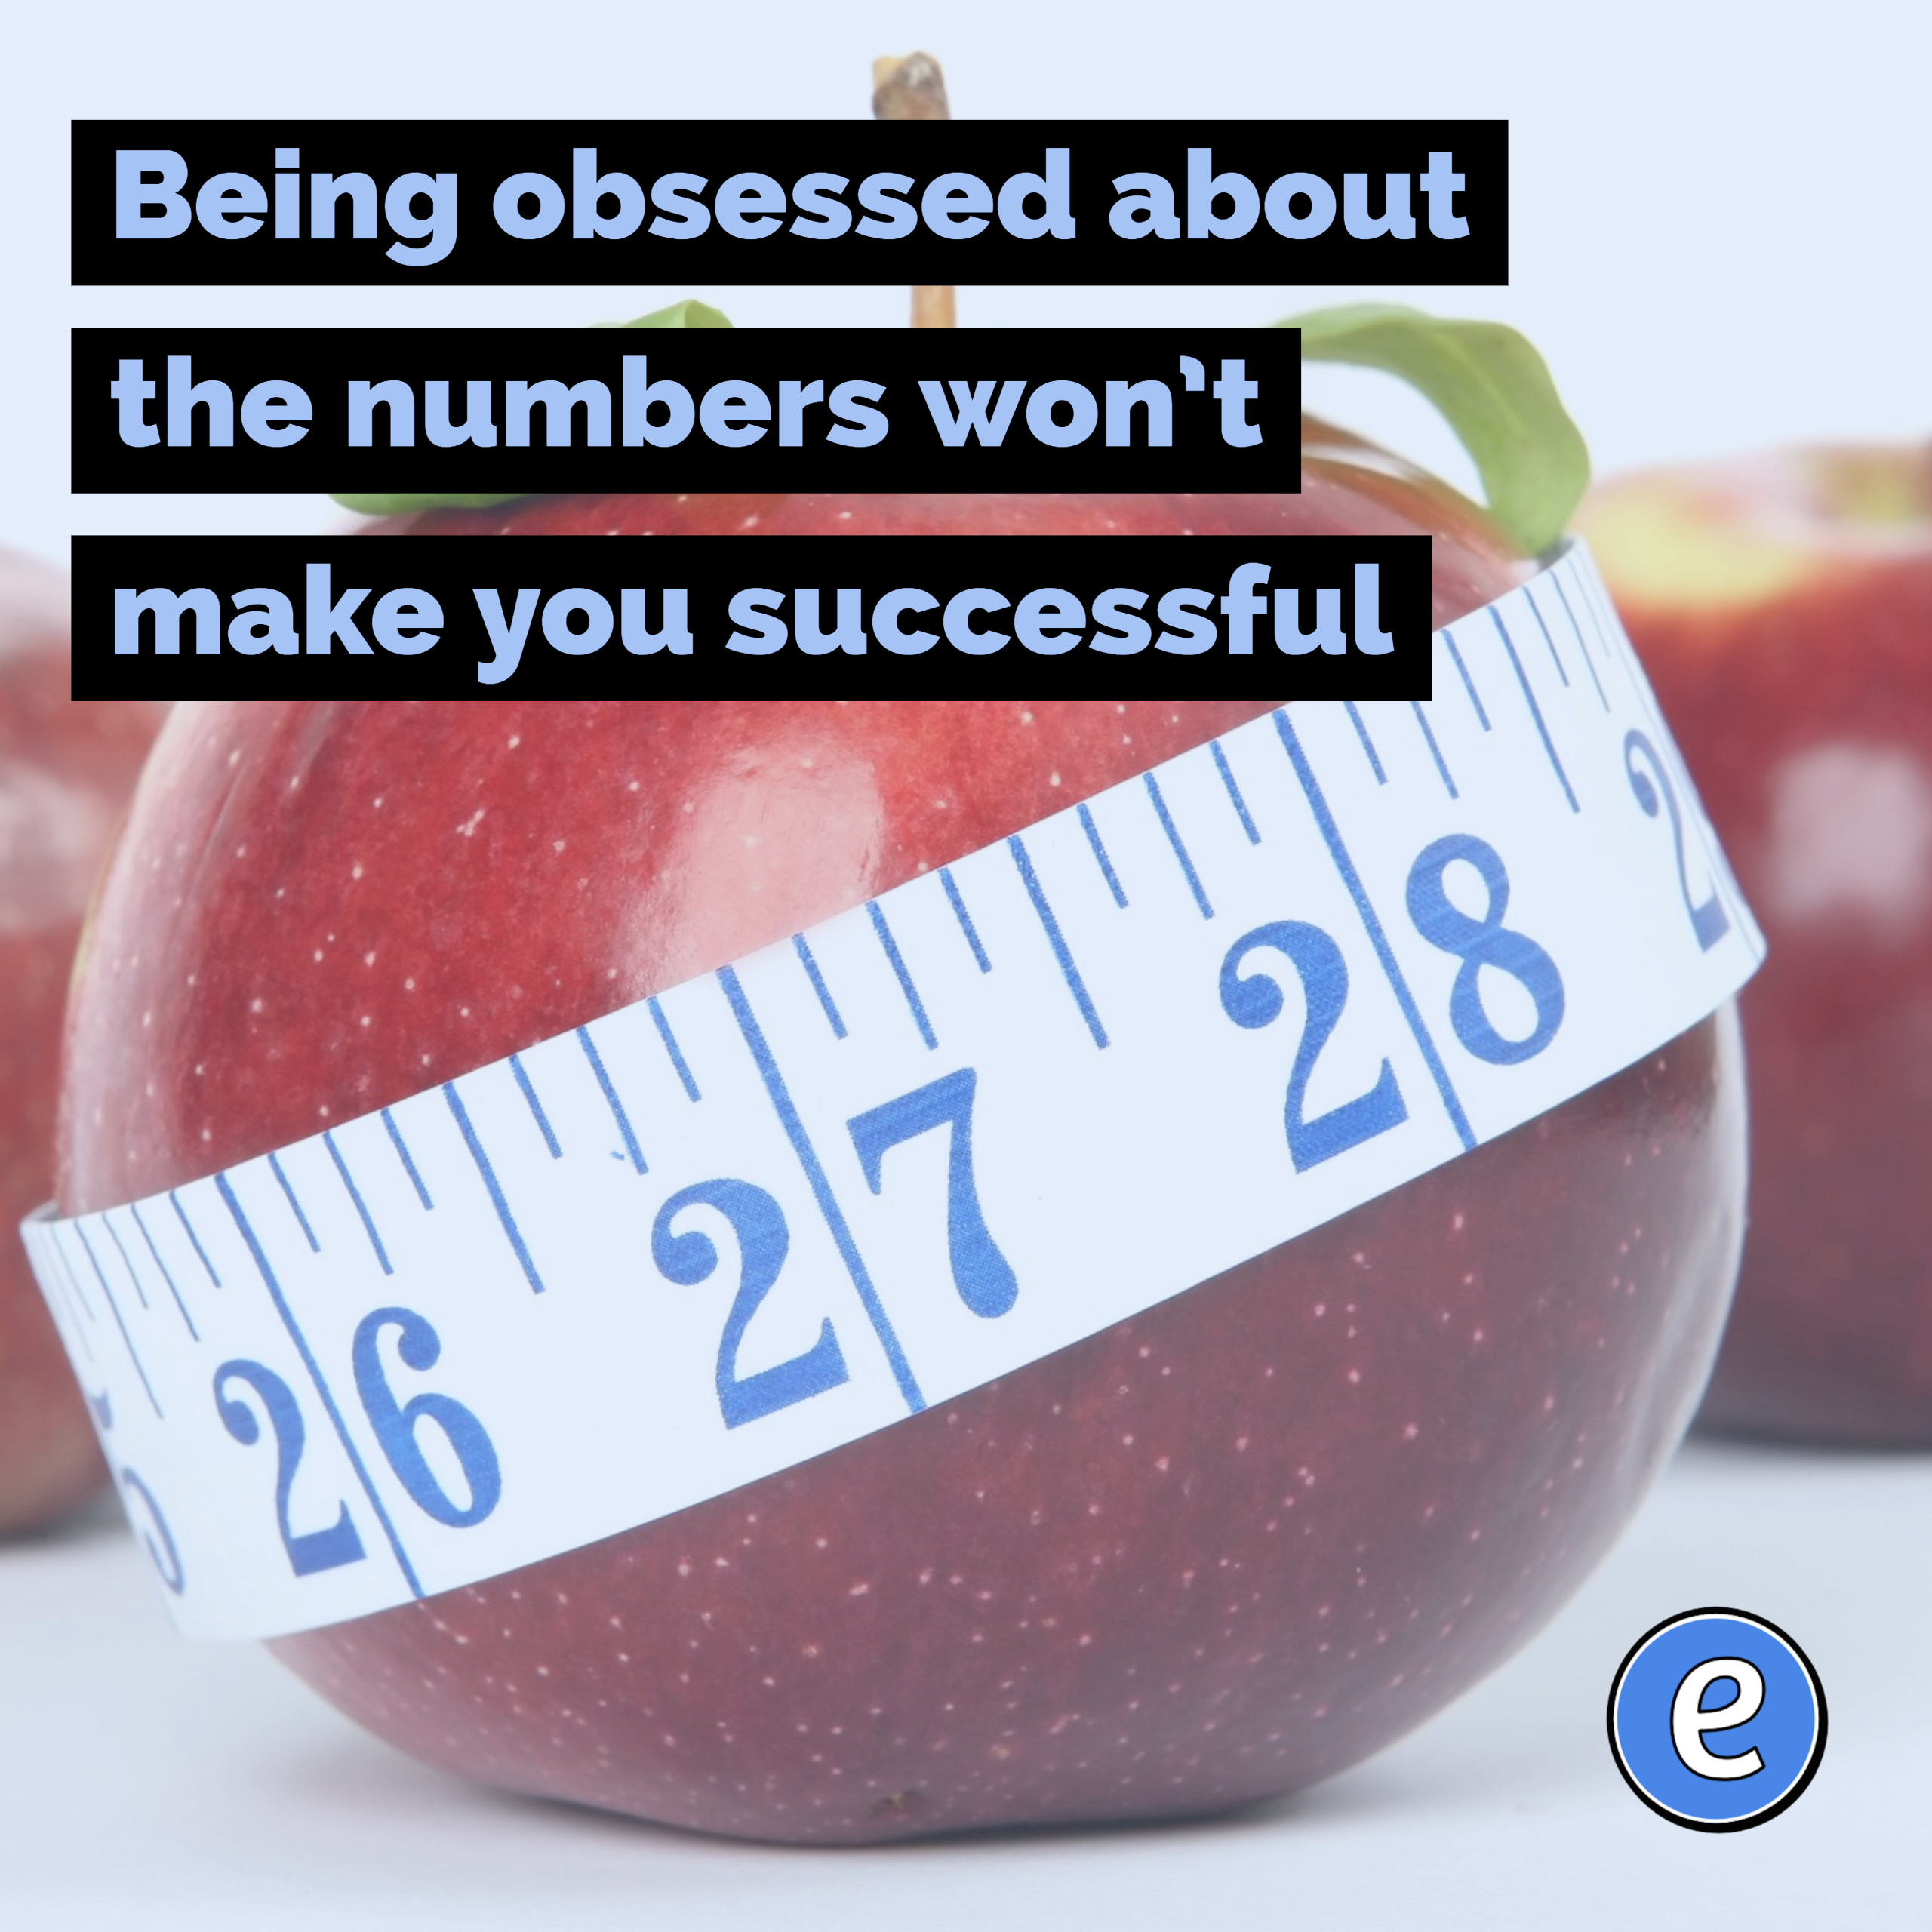 Being obsessed about the numbers won’t make you successful